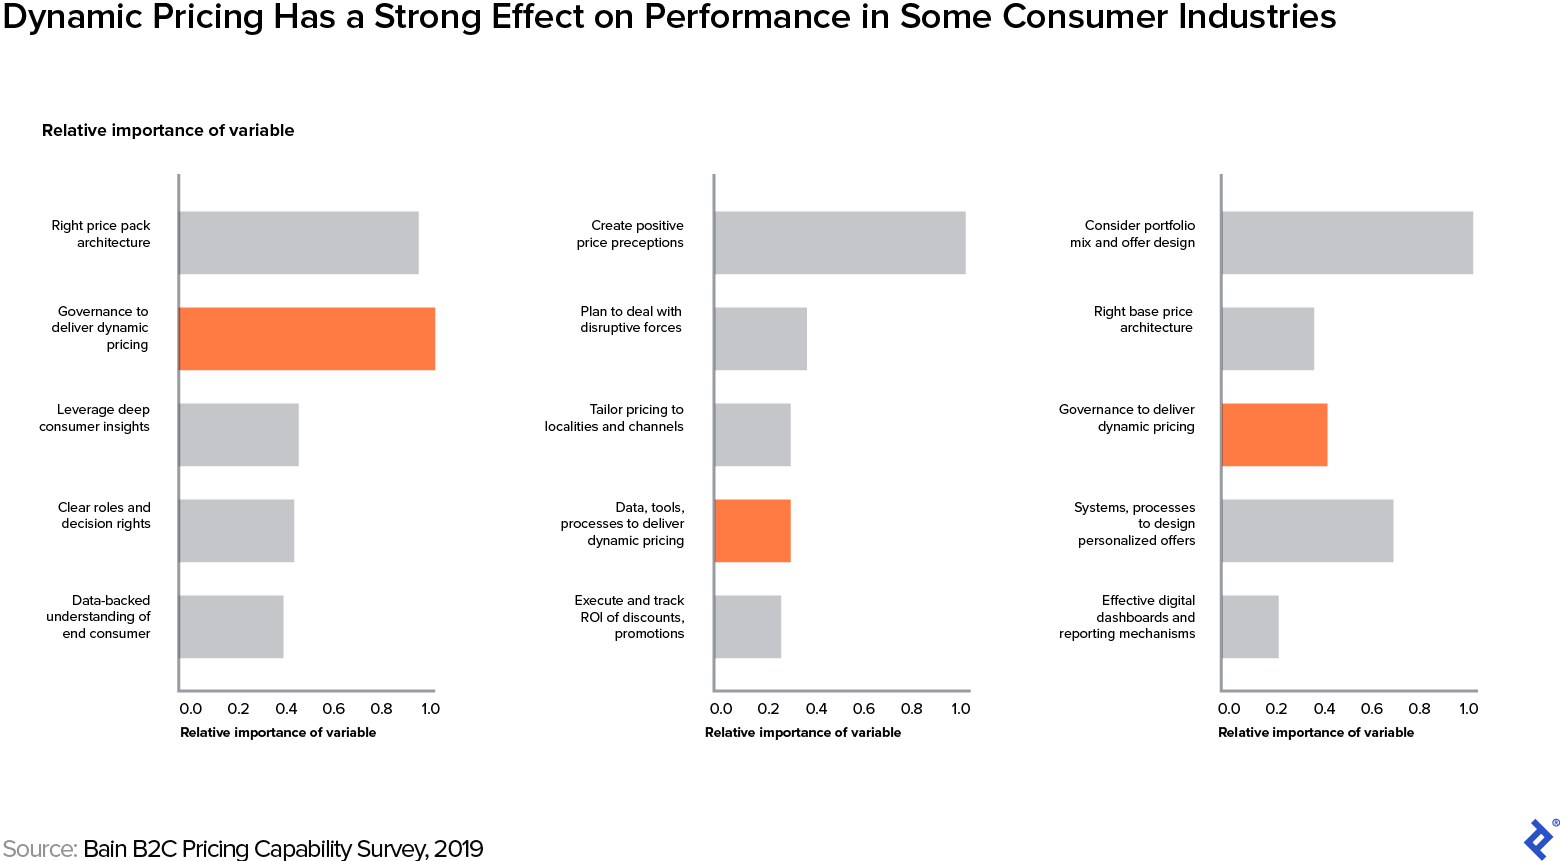 Dynamic pricing ranks among the five most important capabilities affecting top performance in pricing and market share growth in the consumer goods, retail, and telecommunications industries.